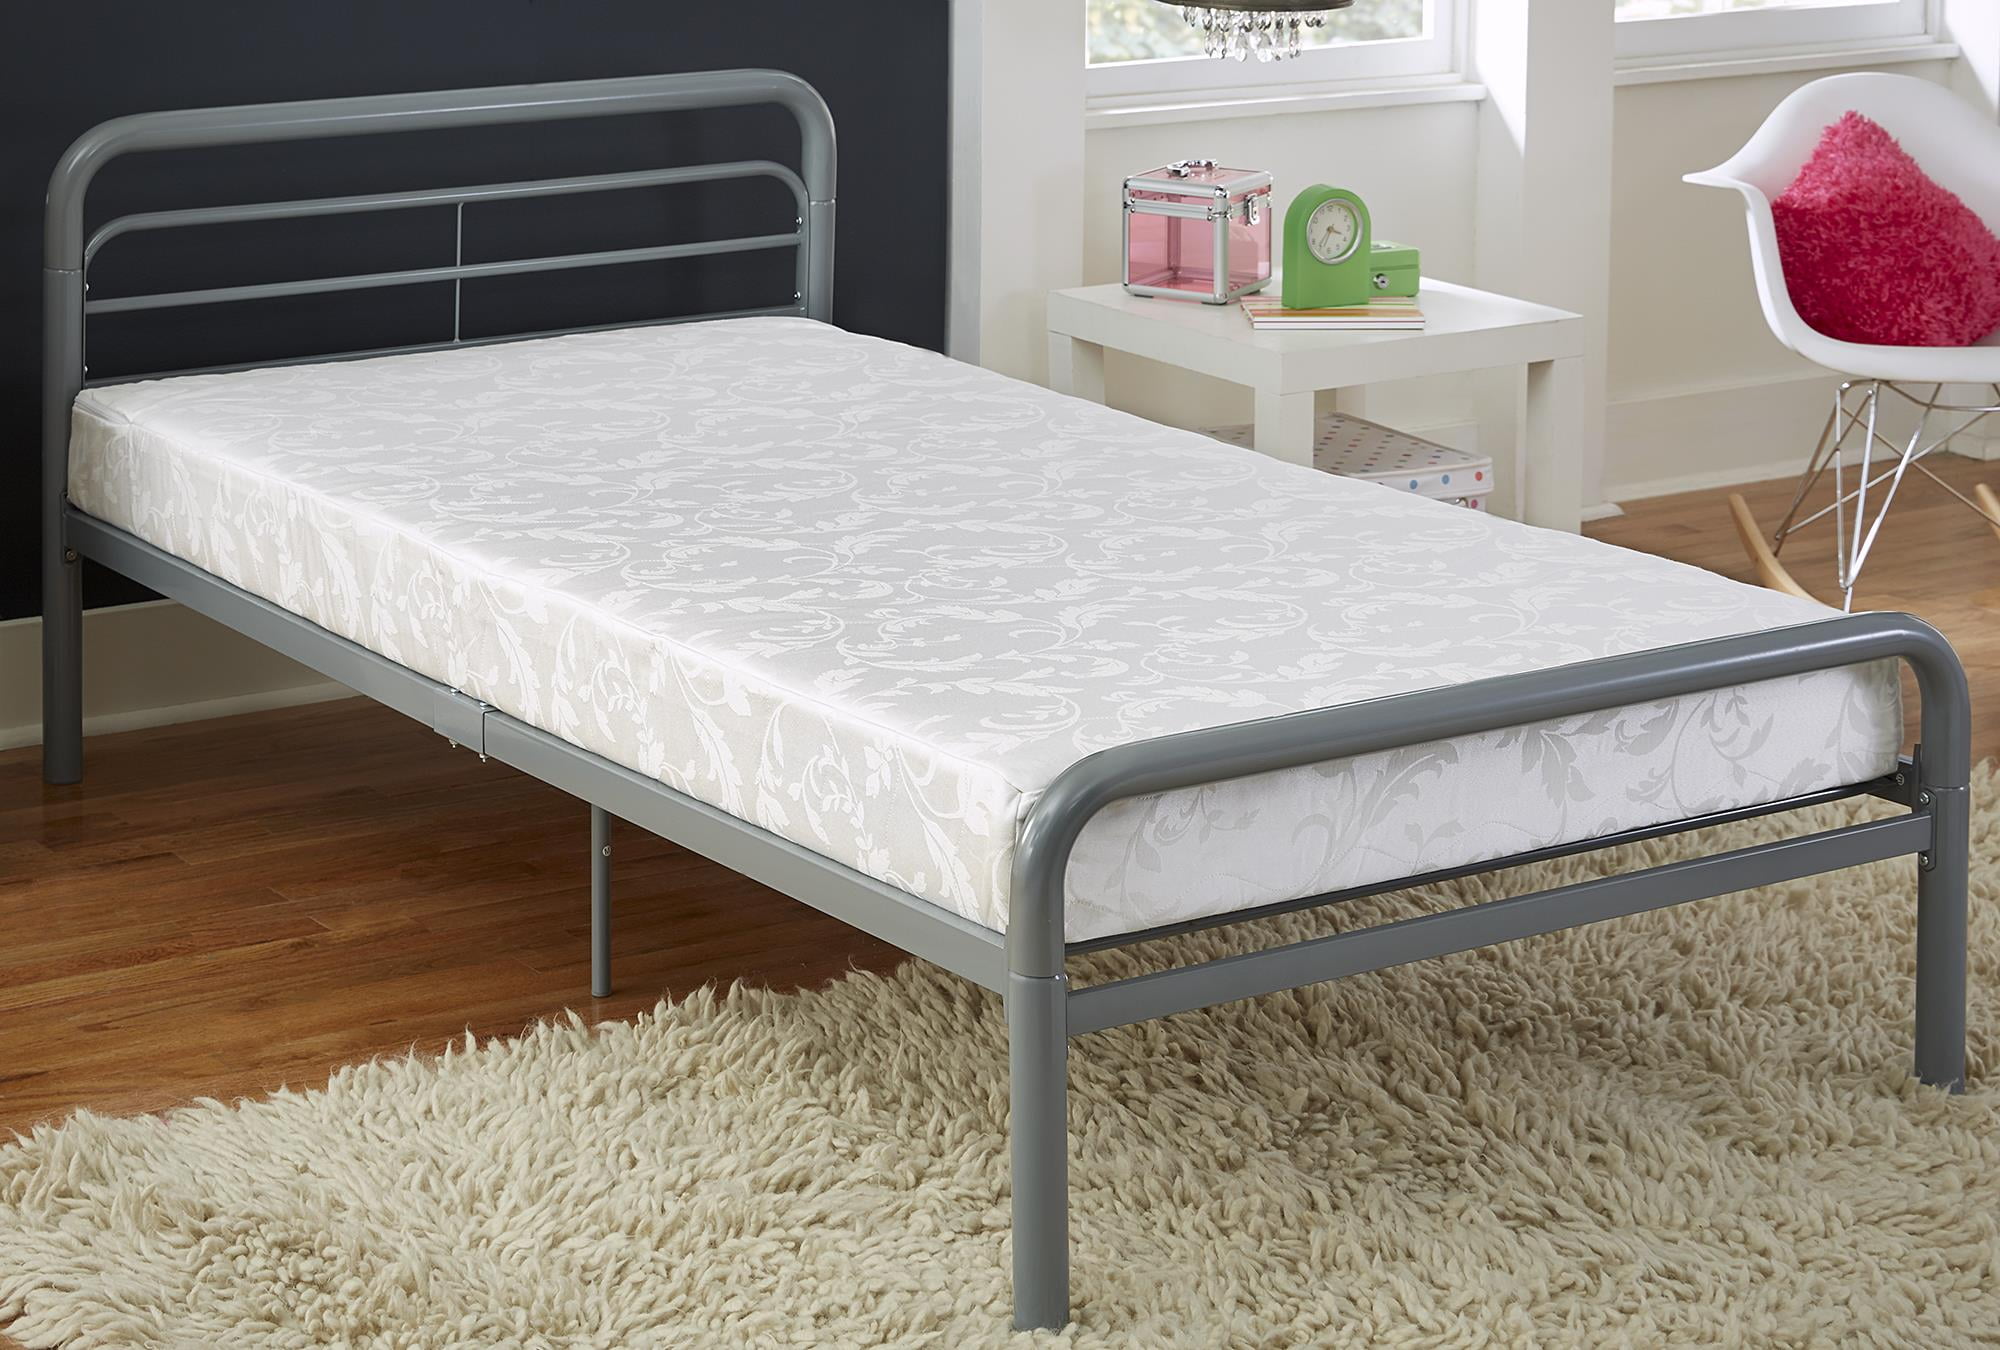 Polyester Filled Bunk Bed Mattress, Twin Bed Mattresses For Bunk Beds